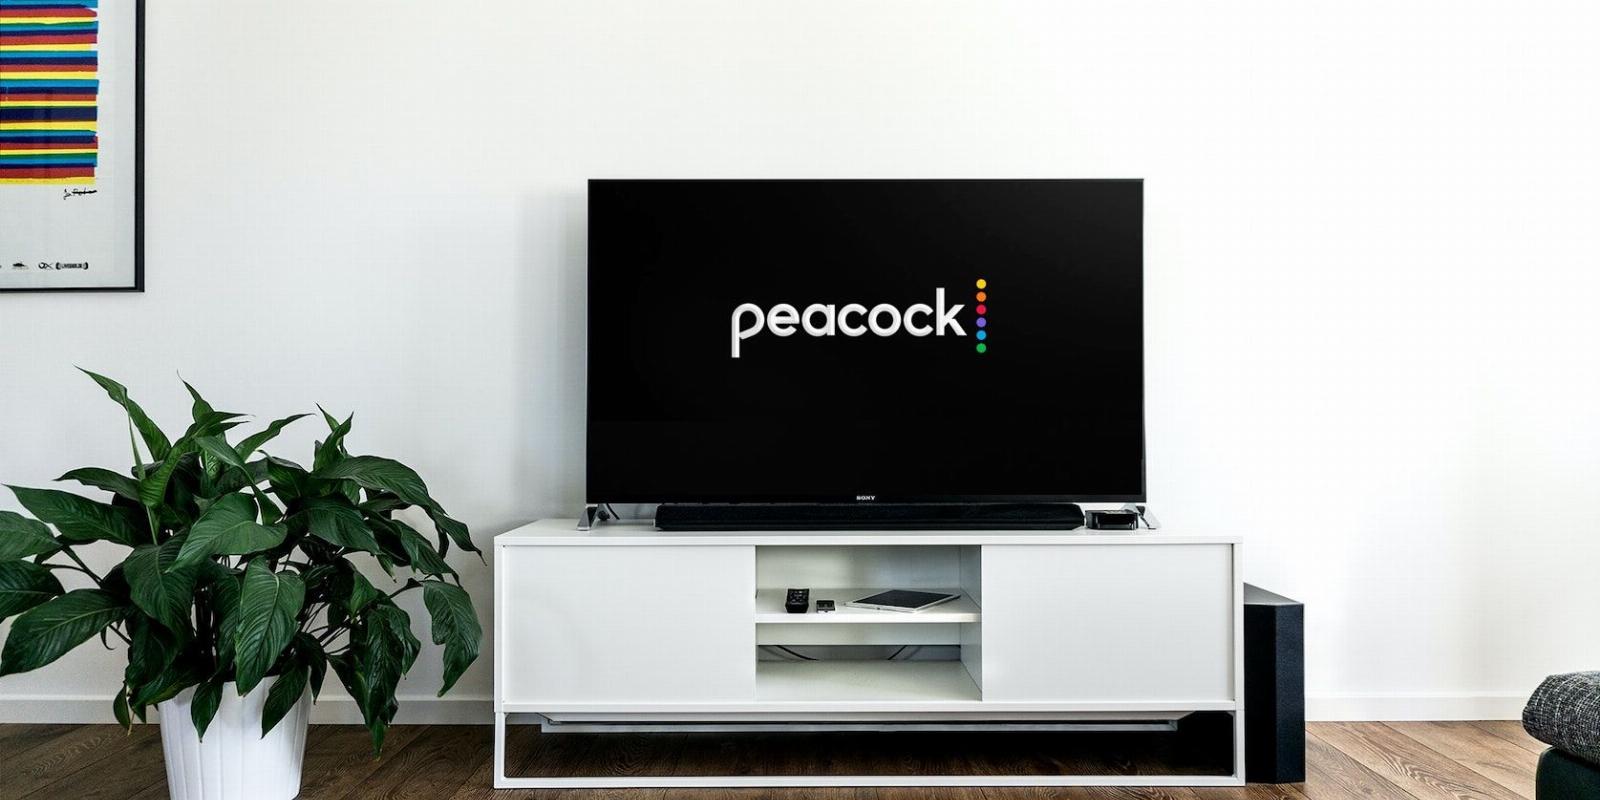 Peacock Is Removing Its Free Tier: What This Means for Existing Subscribers